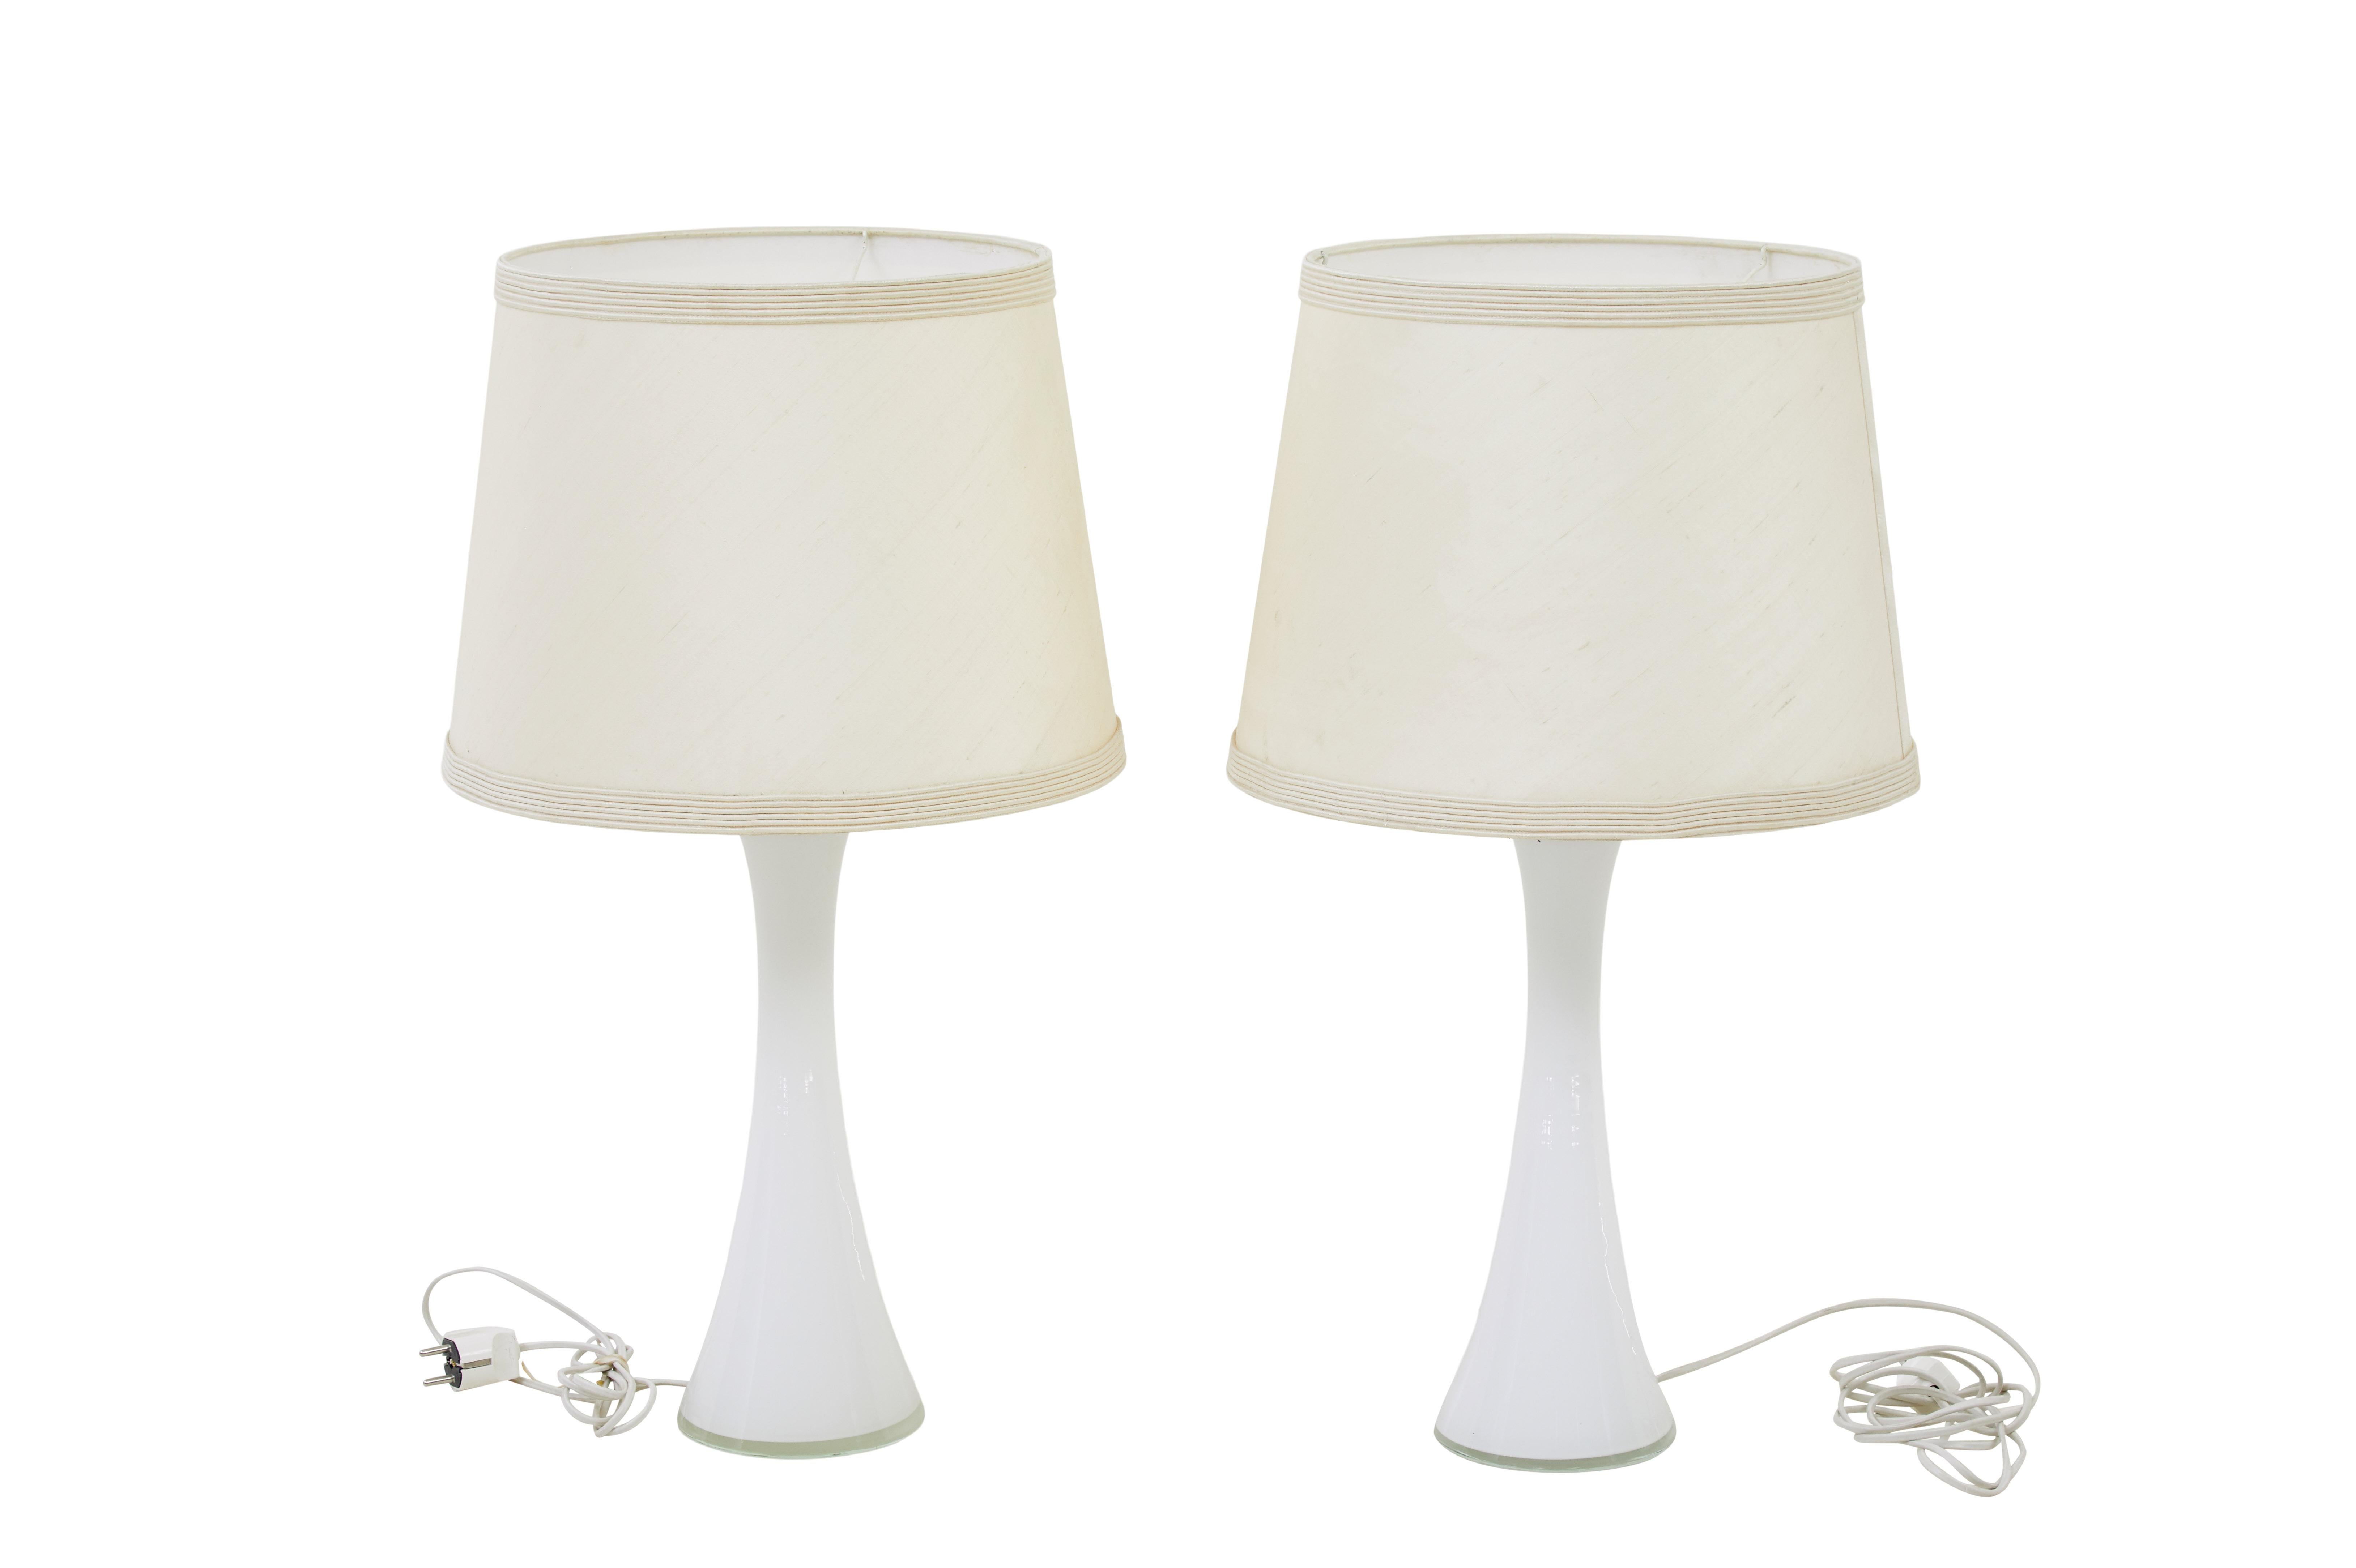 Pair of 1960's white glass table lamps by bergboms circa 1960.

Good quality pair of Bergboms table lights designed by Bernt Nordstedt.   Gentle diabolo shaped, made in white glass with a teak collar on the top to support the light fittings. 